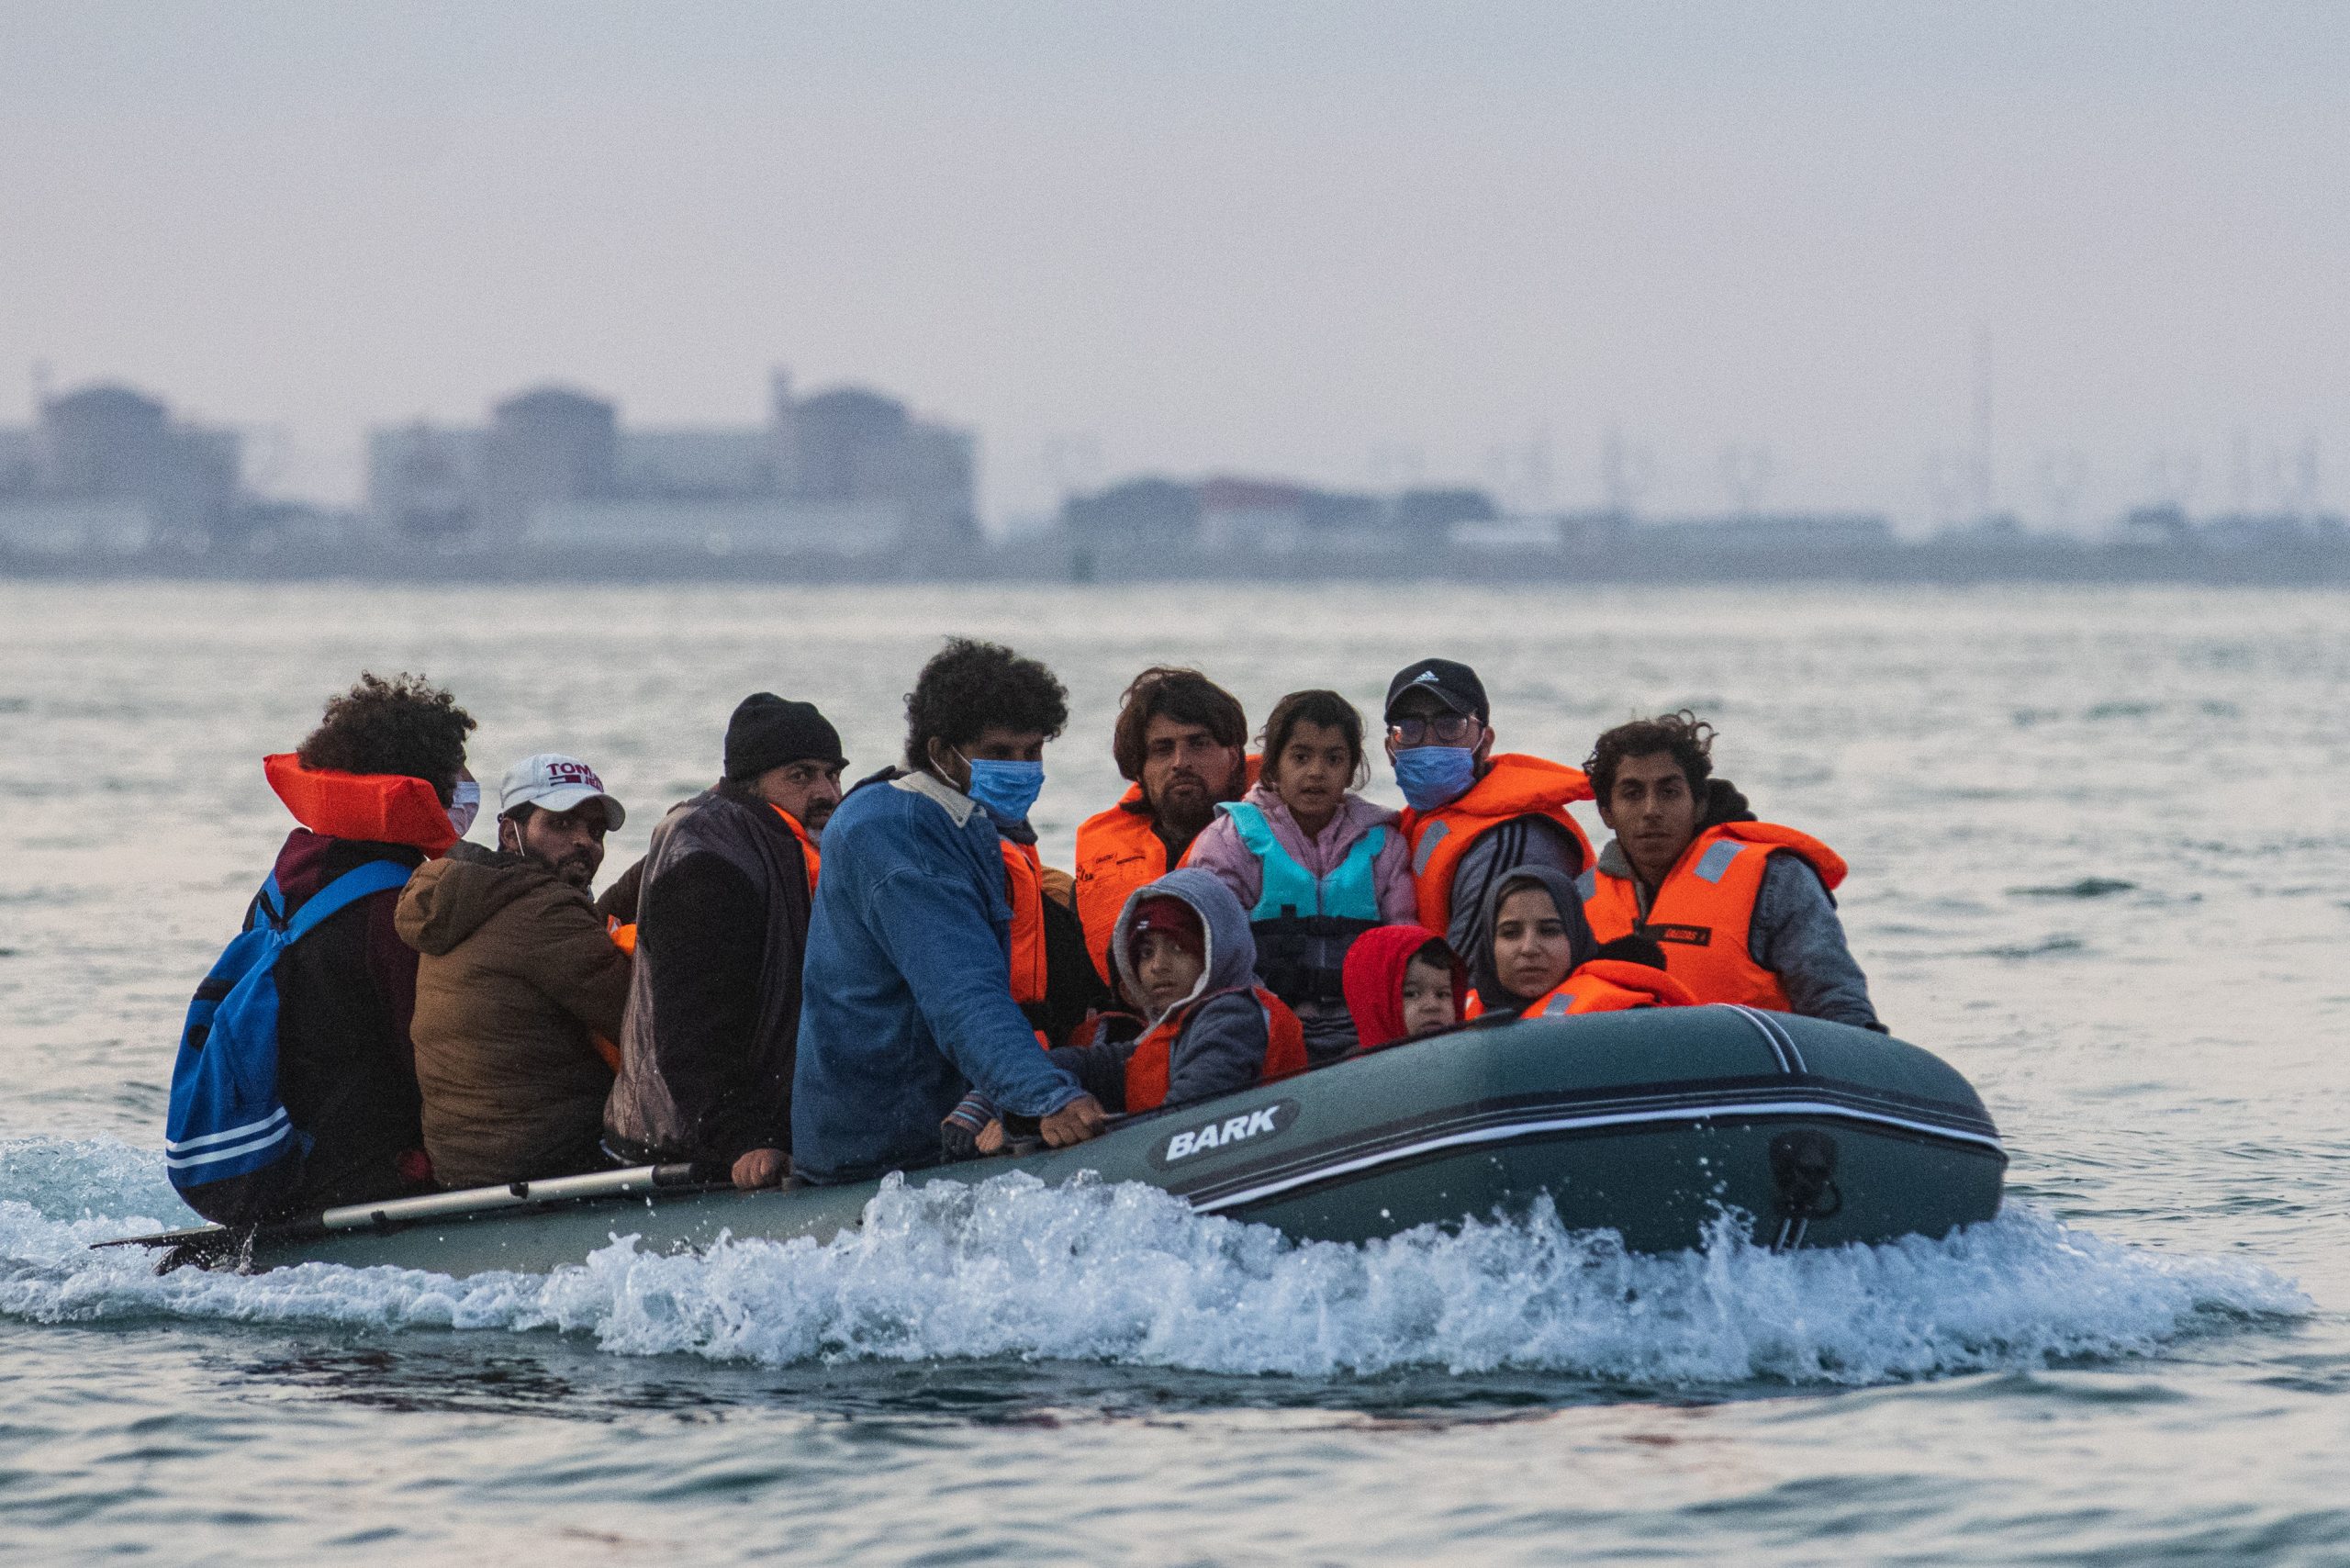 Nearly 2,200 migrants died trying to reach Spain in 2020: NGO